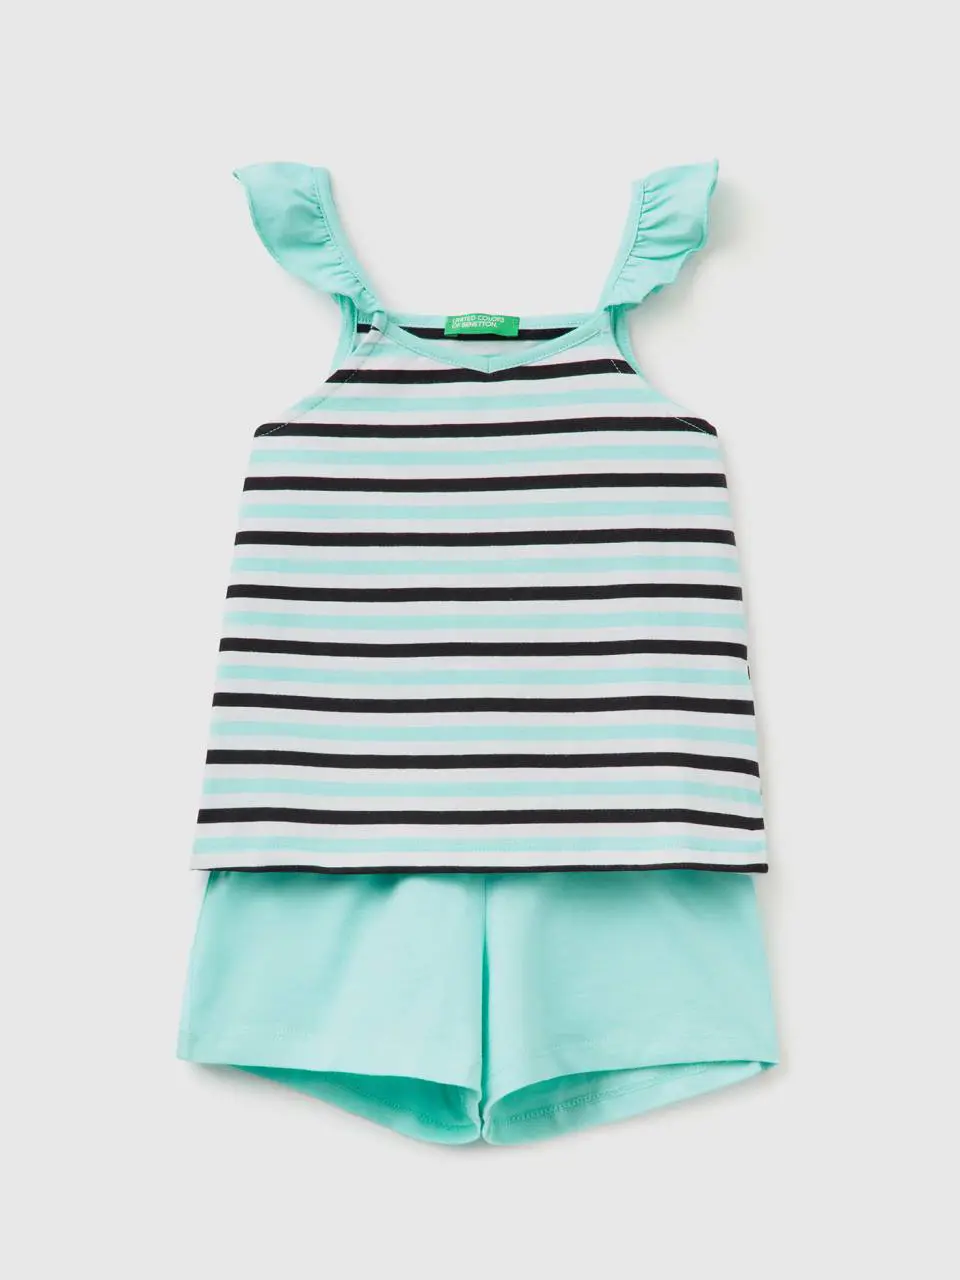 Benetton striped tank top and shorts set. 1